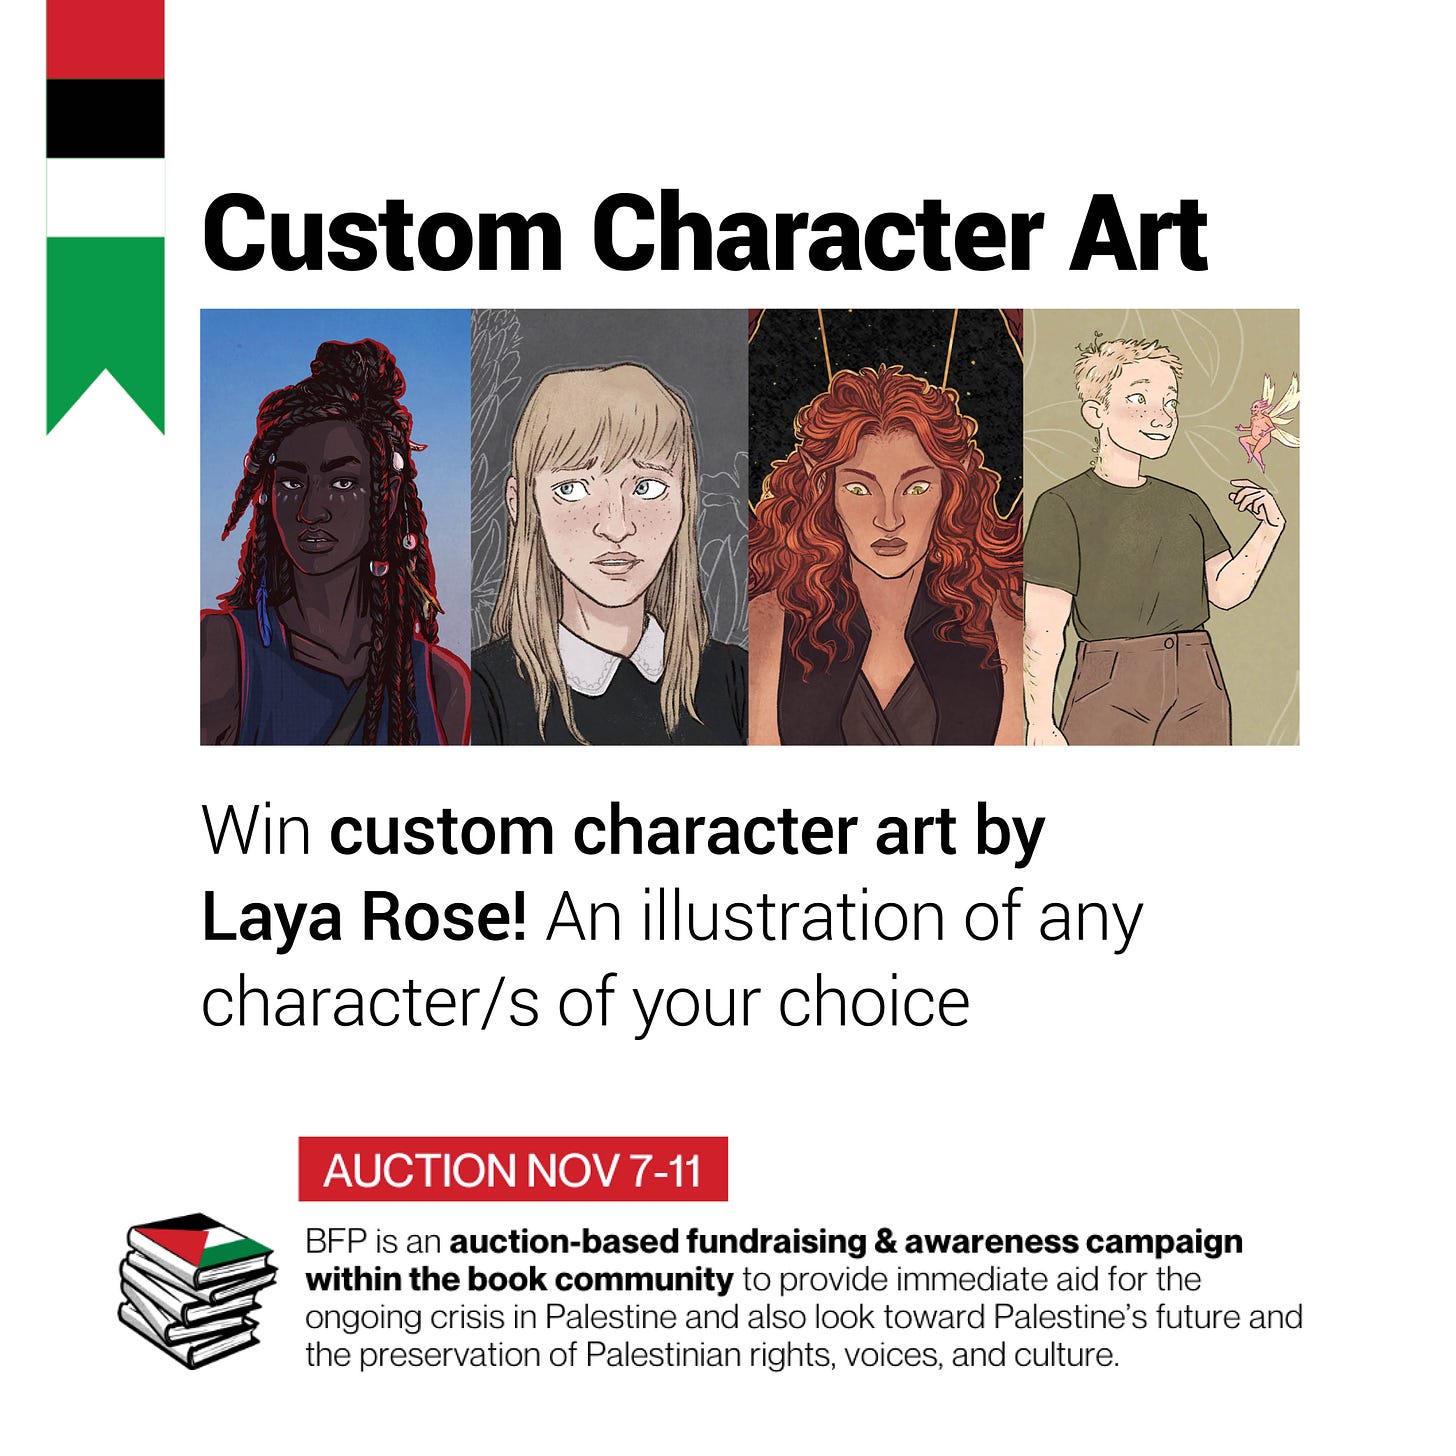 Graphic reading: **Custom Character Art.** an image of four cropped character portraits.   Win custom character art by Laya Rose! An illustration of any character/s of your choice  Auction: Nov 7-11. BFP is an auction-based fundraising & awareness campaign within the book community to provide immediate aid for the ongoing crisis in Palestine and also look toward Palestine’s future and the preservation of Palestinian right, voices, and culture.